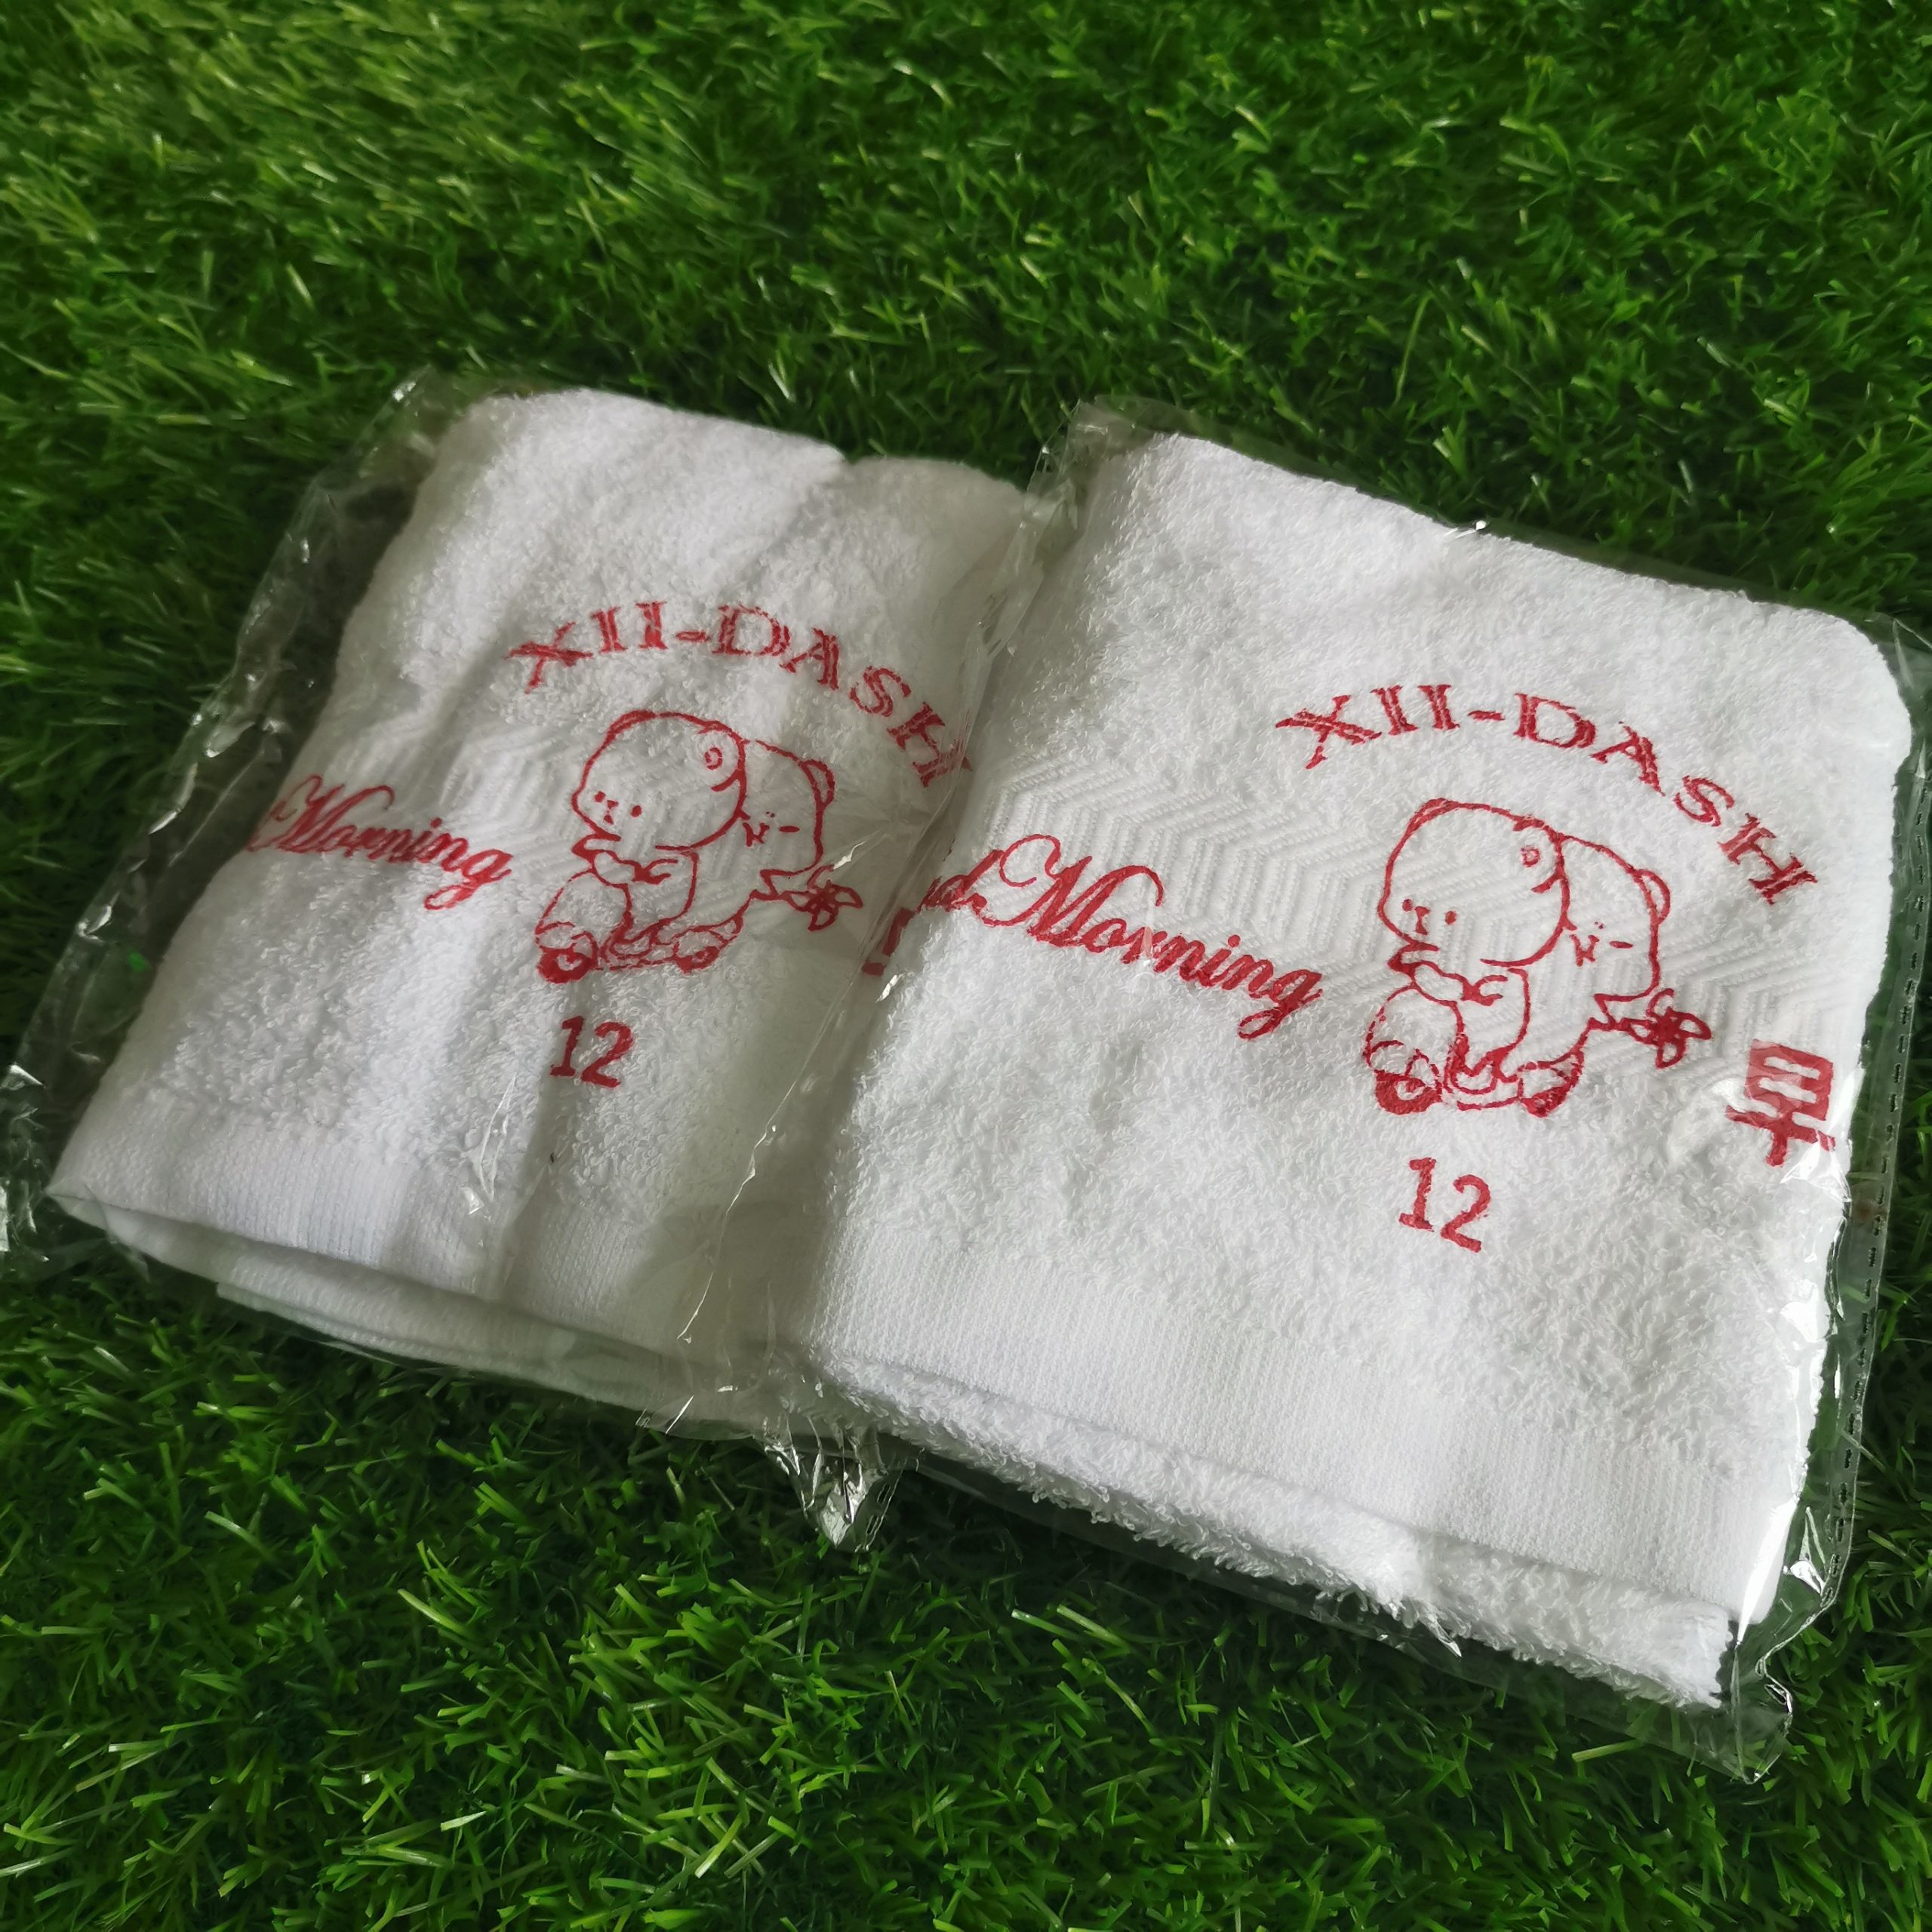 Red Silkscreen Printing on White Towels